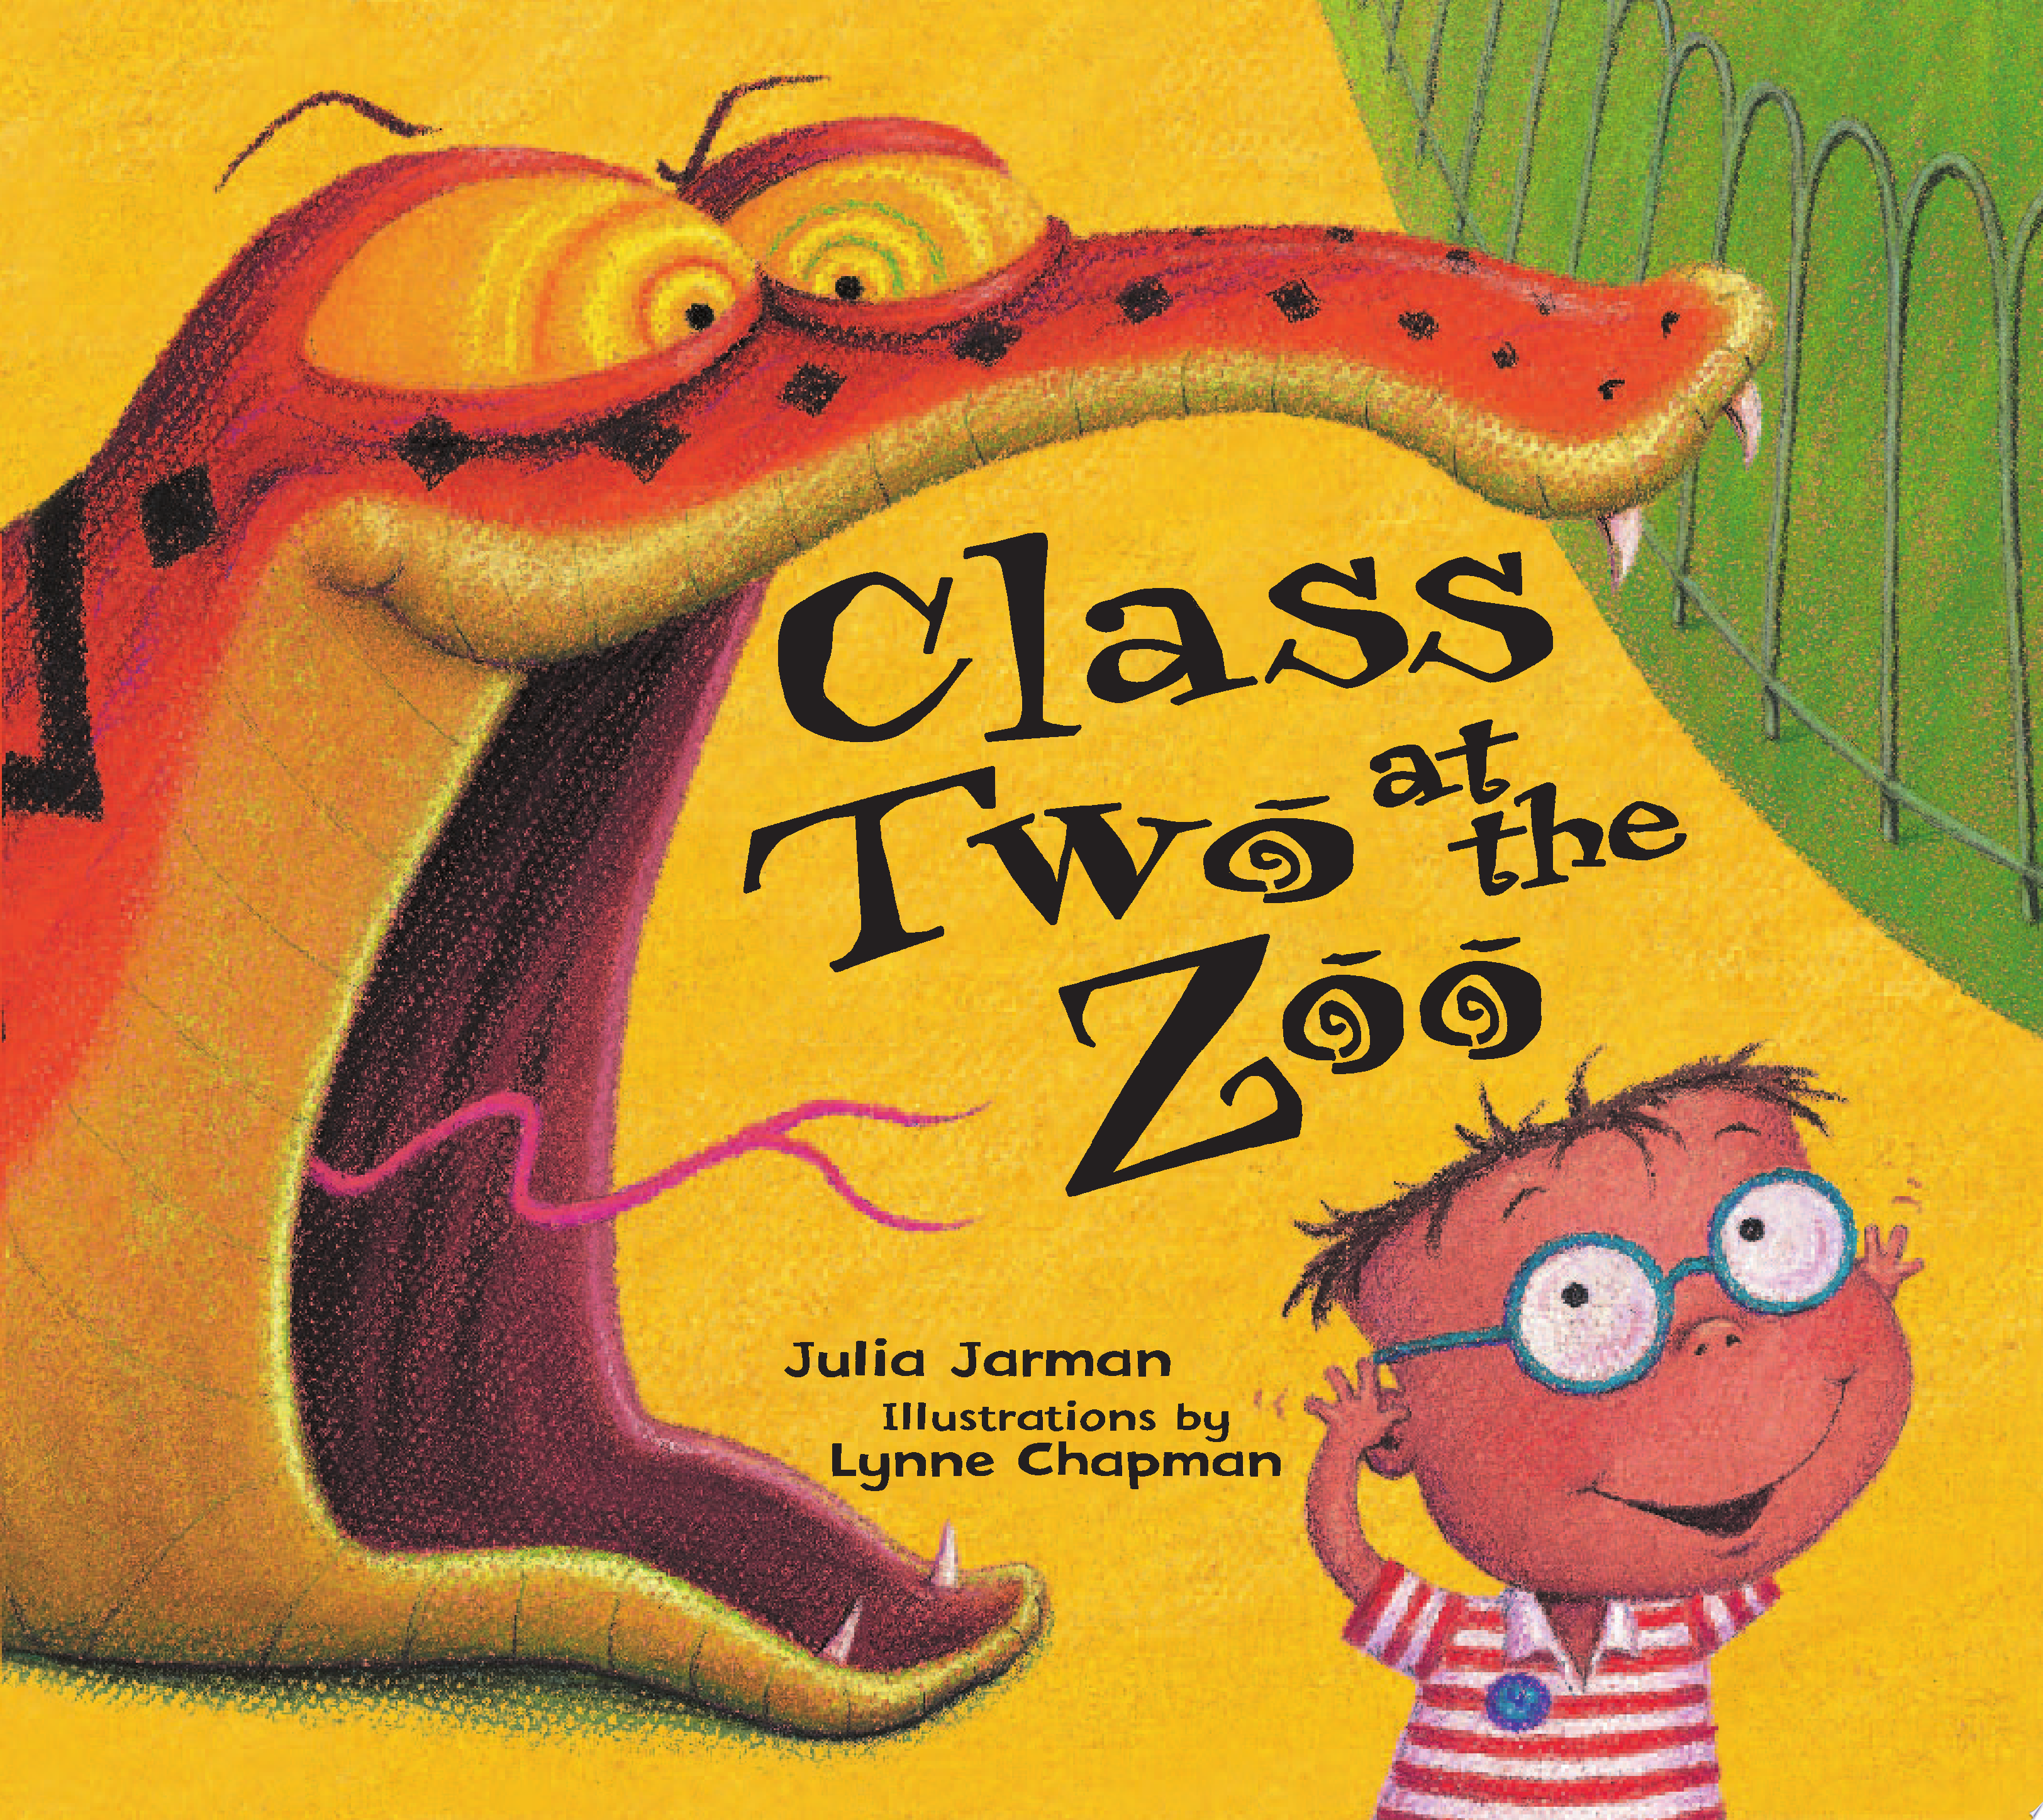 Image for "Class Two at the Zoo"